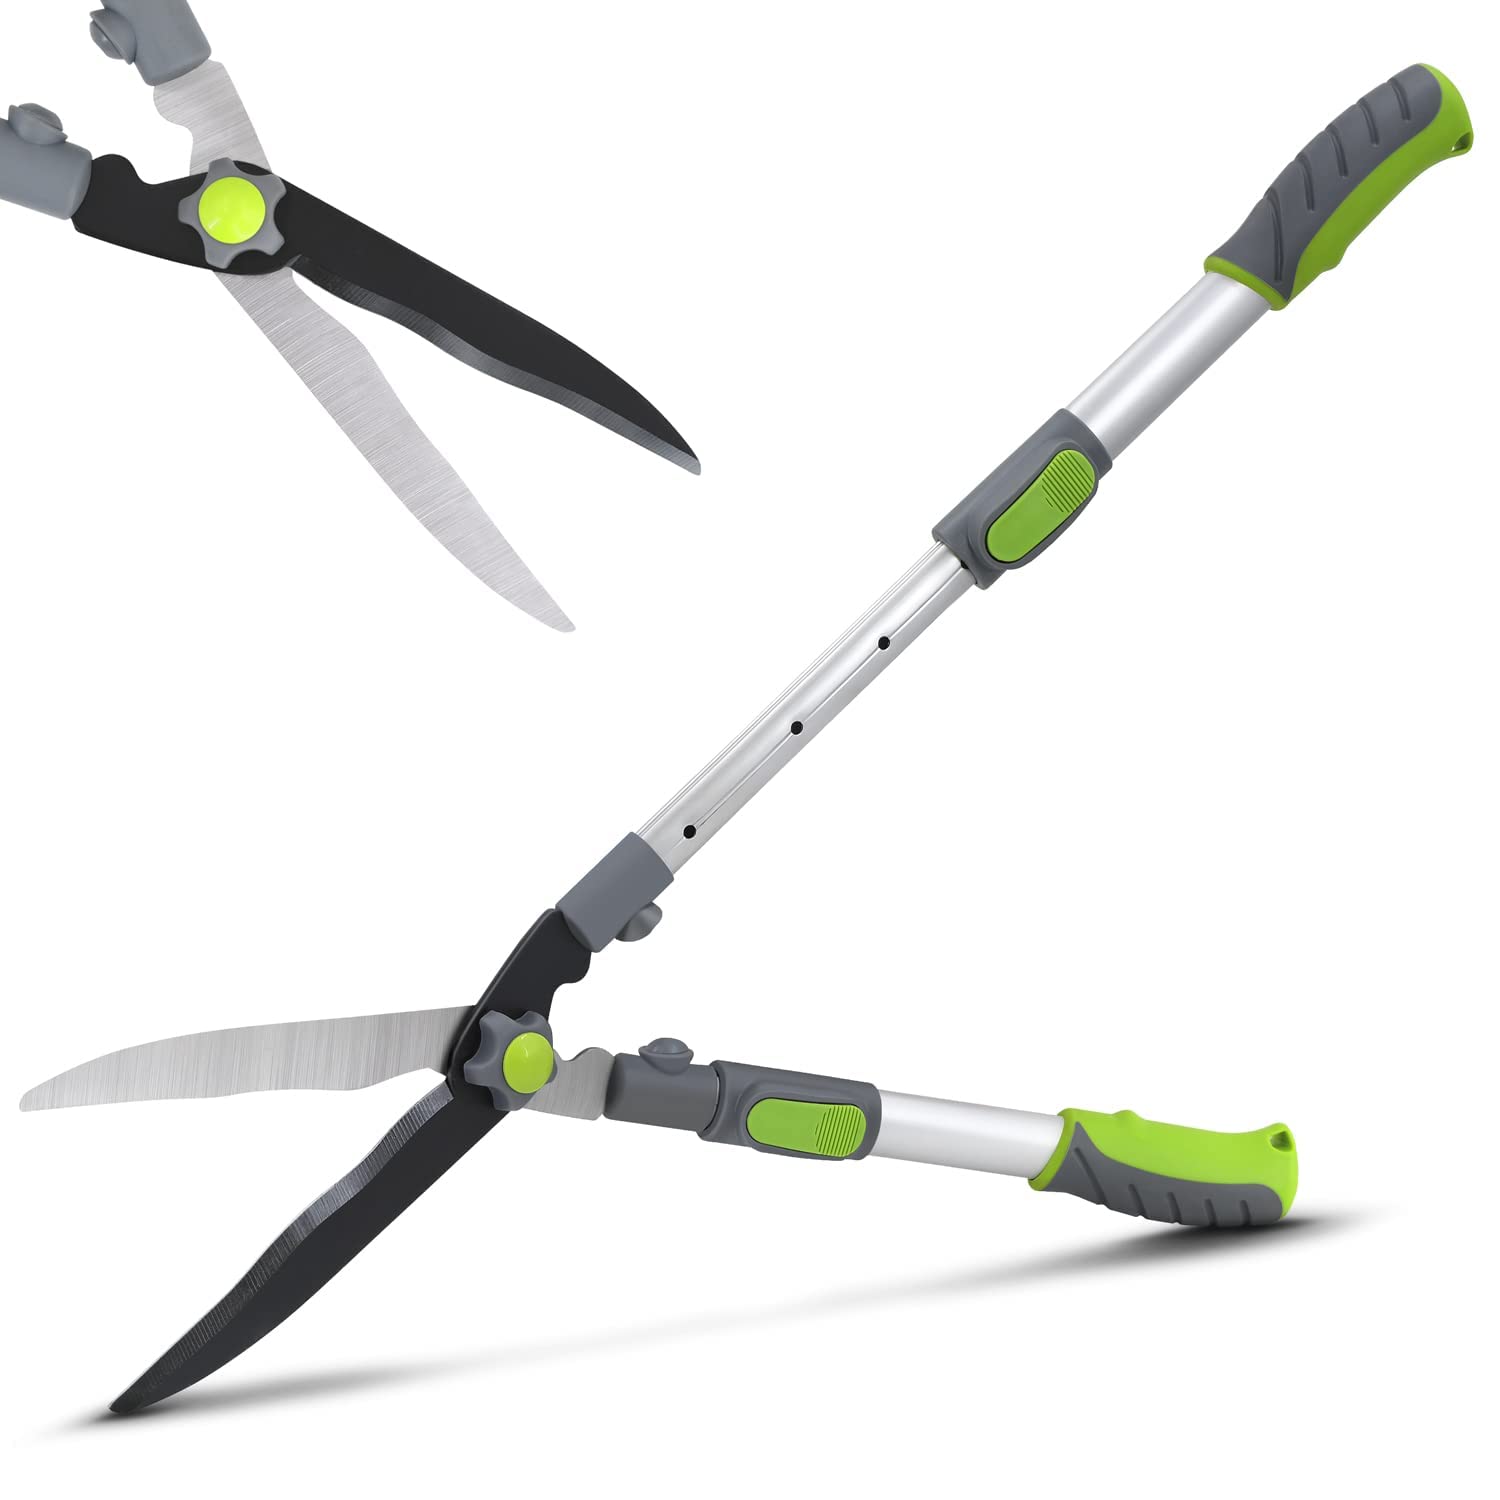 Altdorff Extendable Hedge Shears with Adjustable Handle, Shock-Absorbing Bumpers, Telescopic garden Hedge clippers Hand 